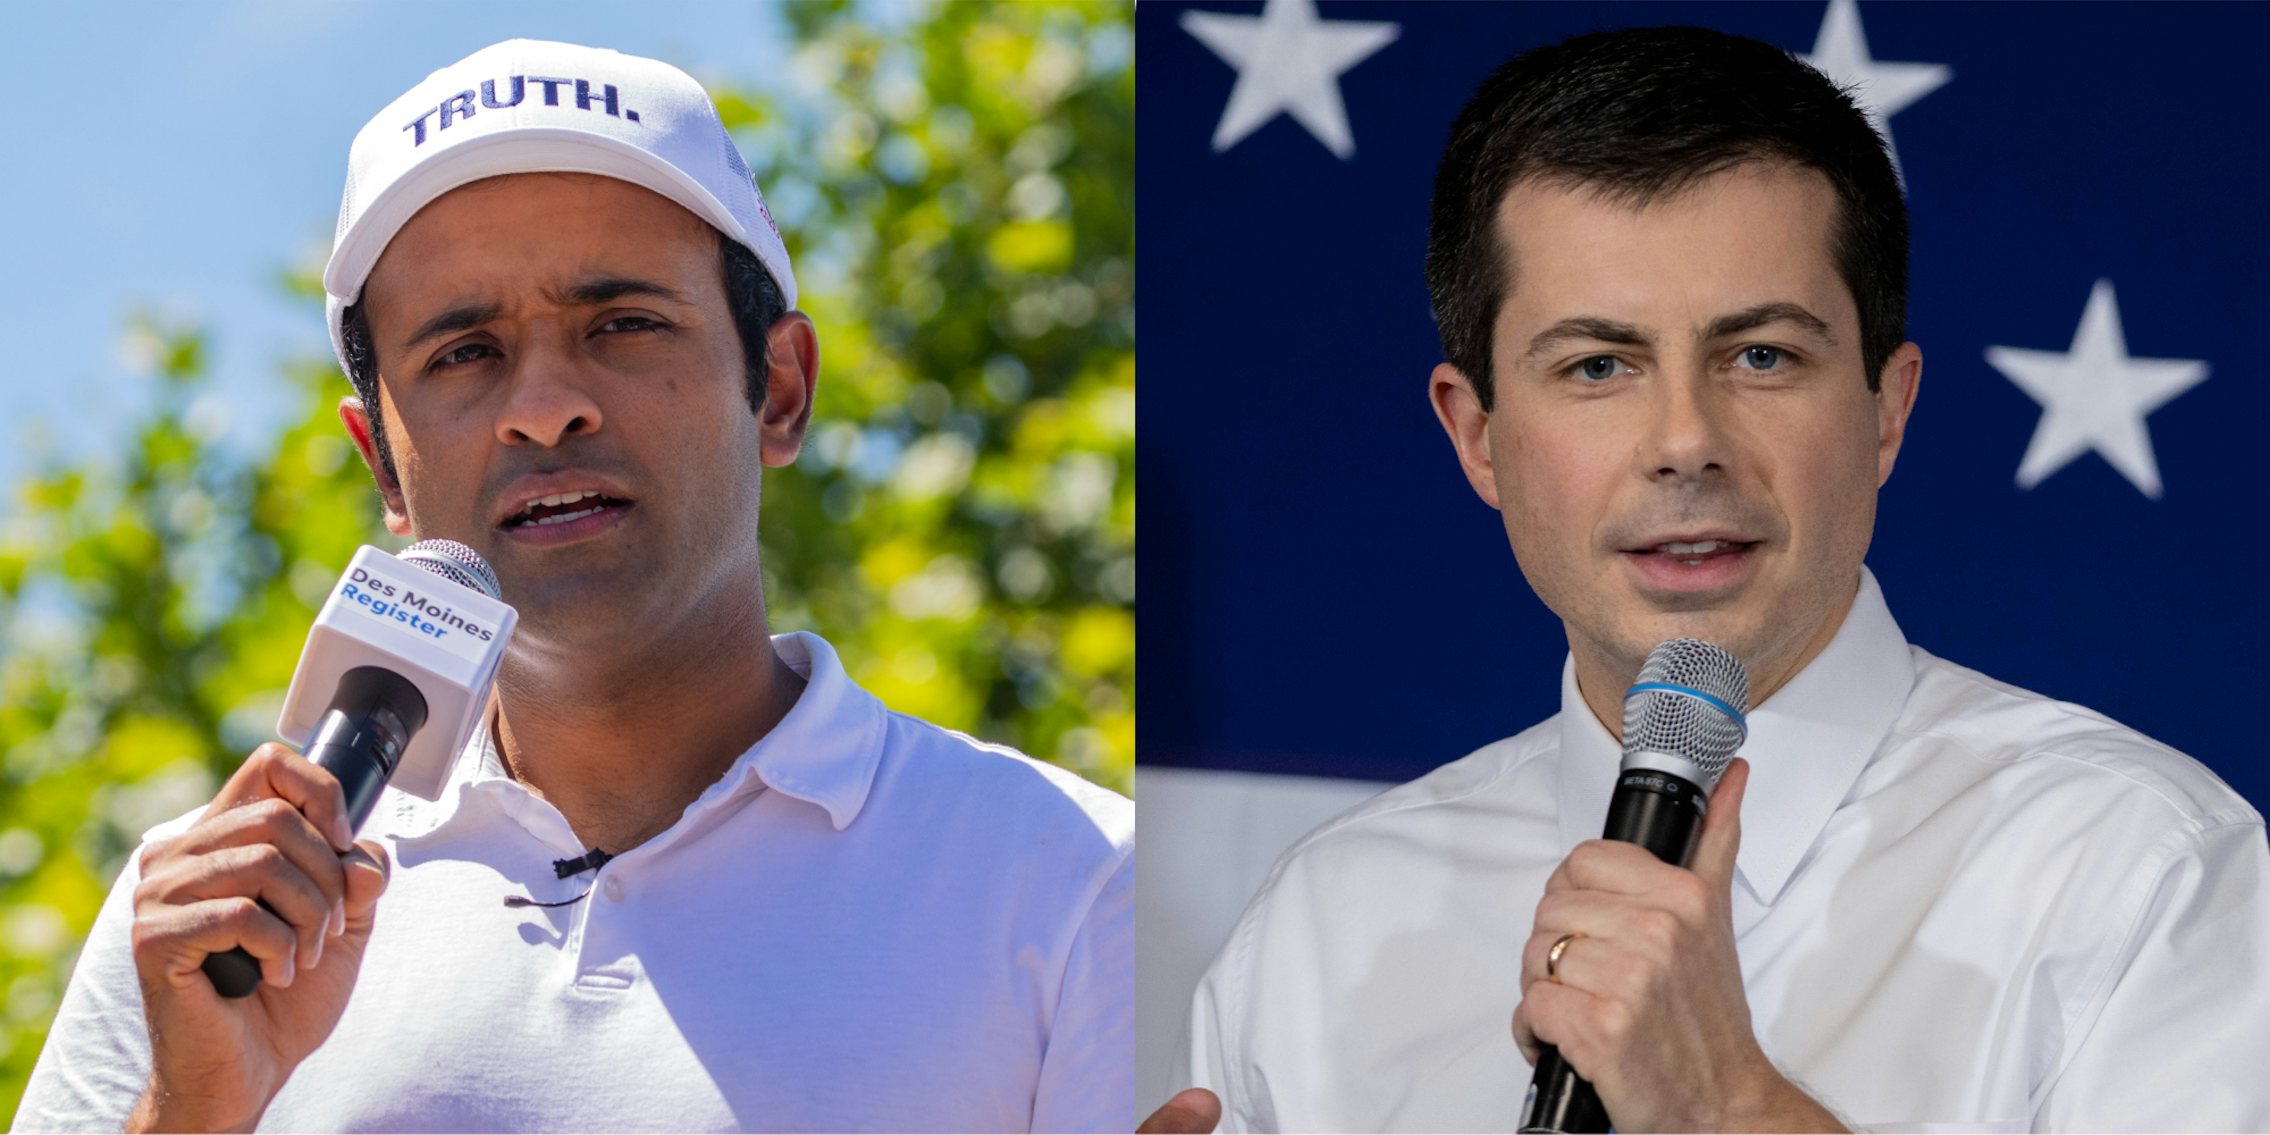 Vivek Ramaswamy speaking into microphone outside (l) Pete Buttigieg speaking into microphone in front of blue with white stars background (r)